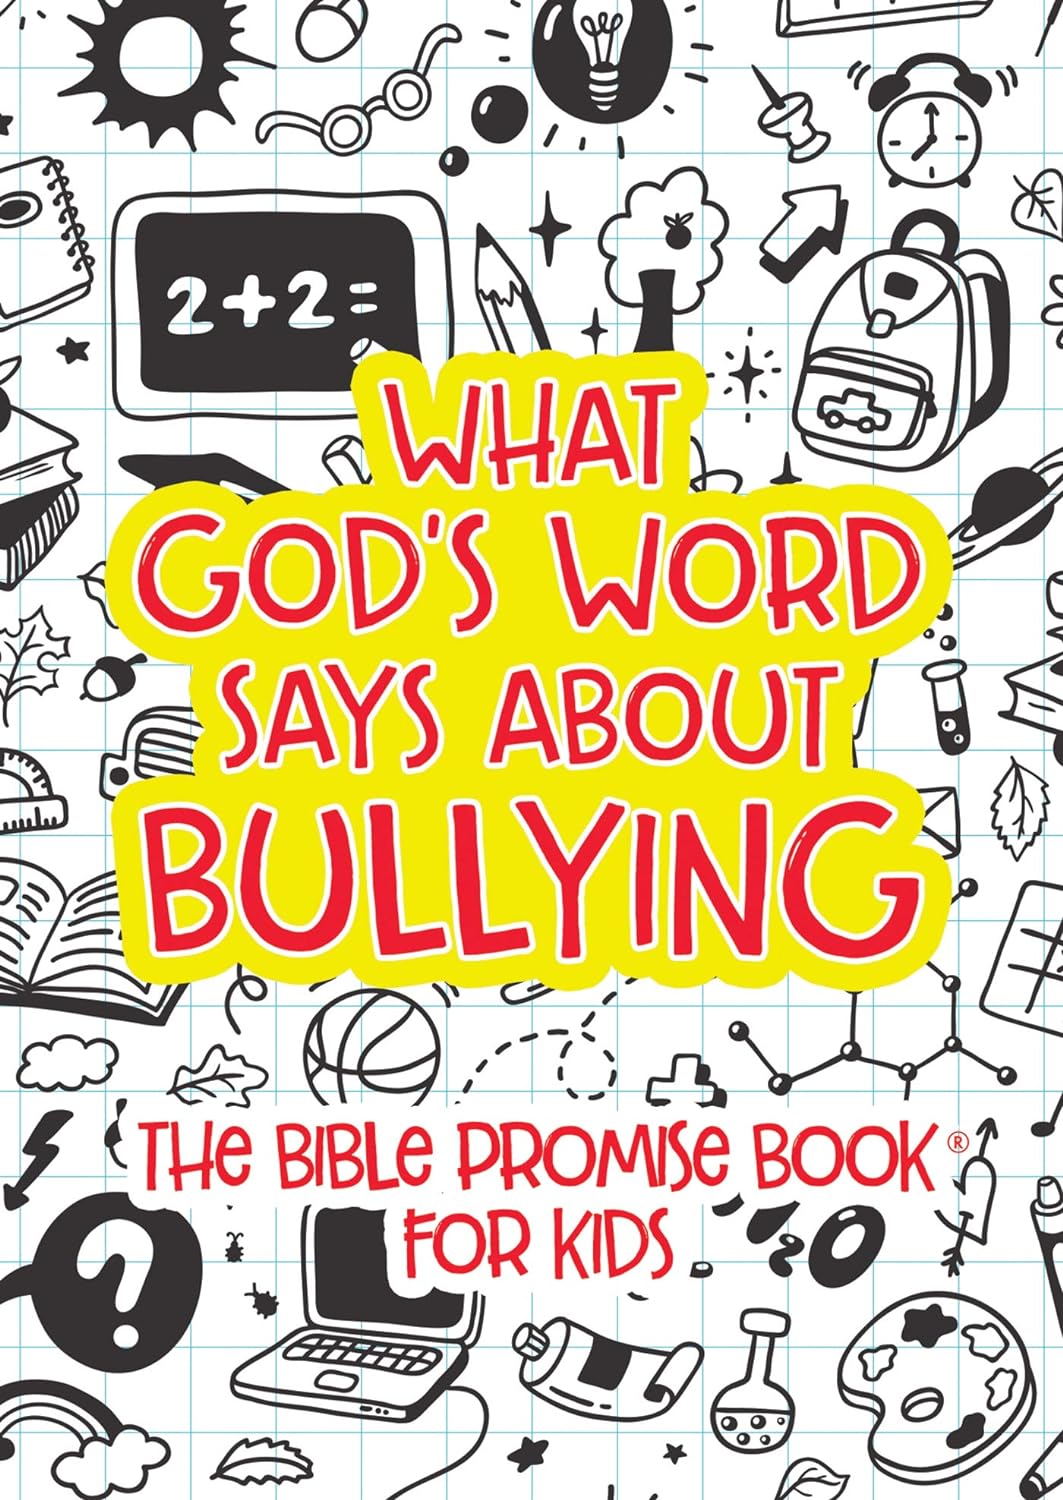 What God's Word Says About Bullying